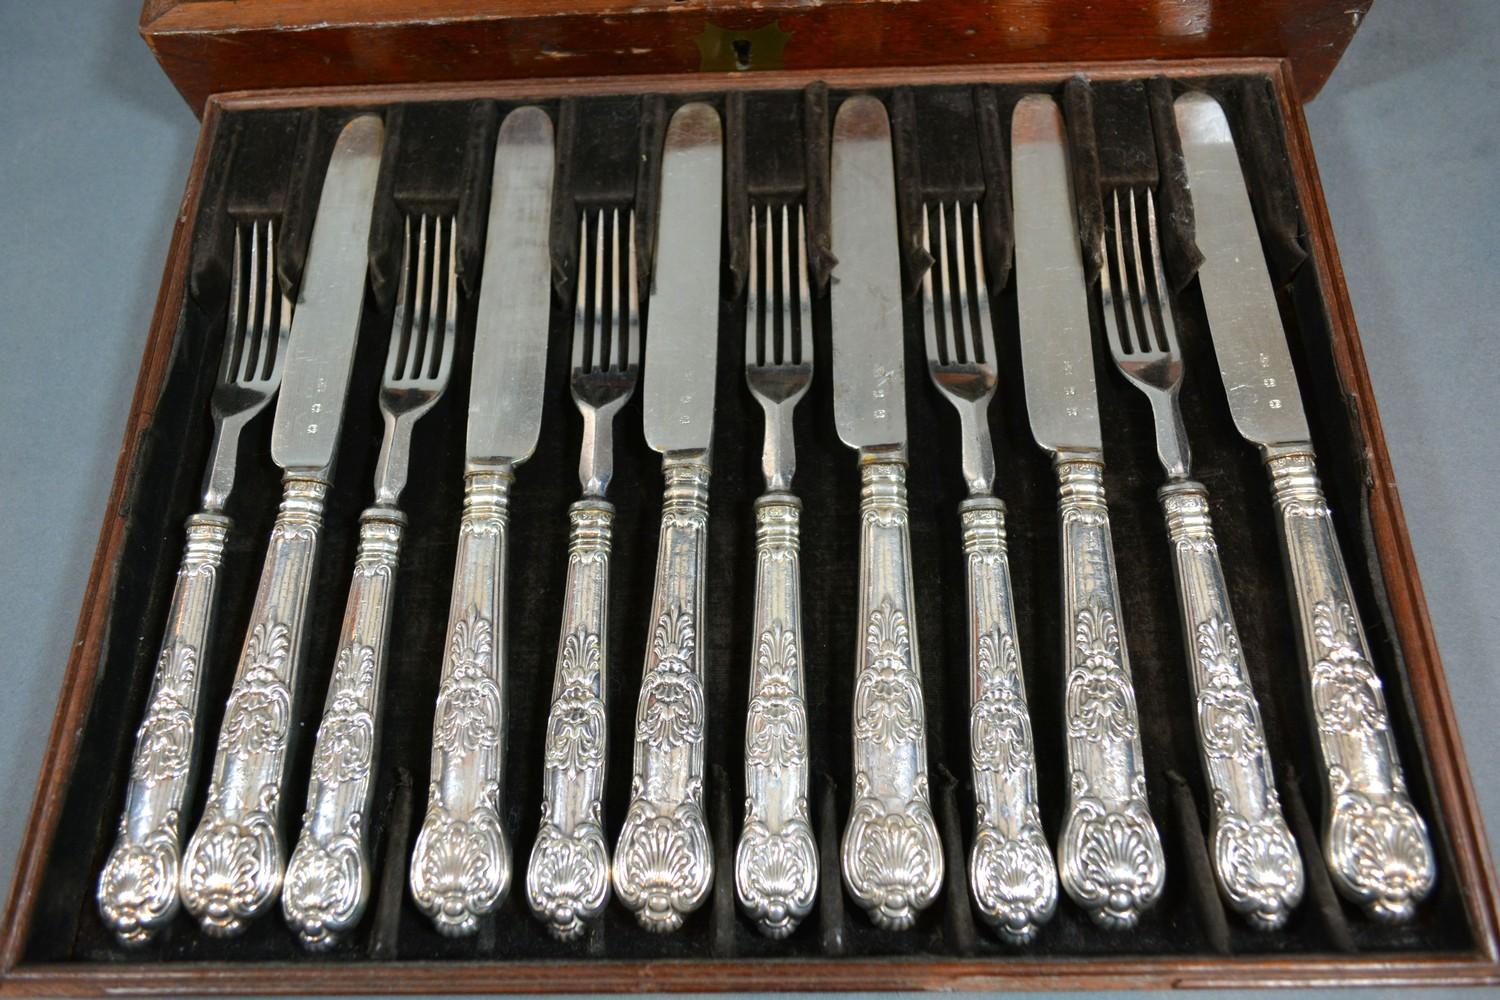 A Cased Set of Twelve Silver Handled Dessert Knives and Forks with Silver Kings Pattern Handles - Image 2 of 2